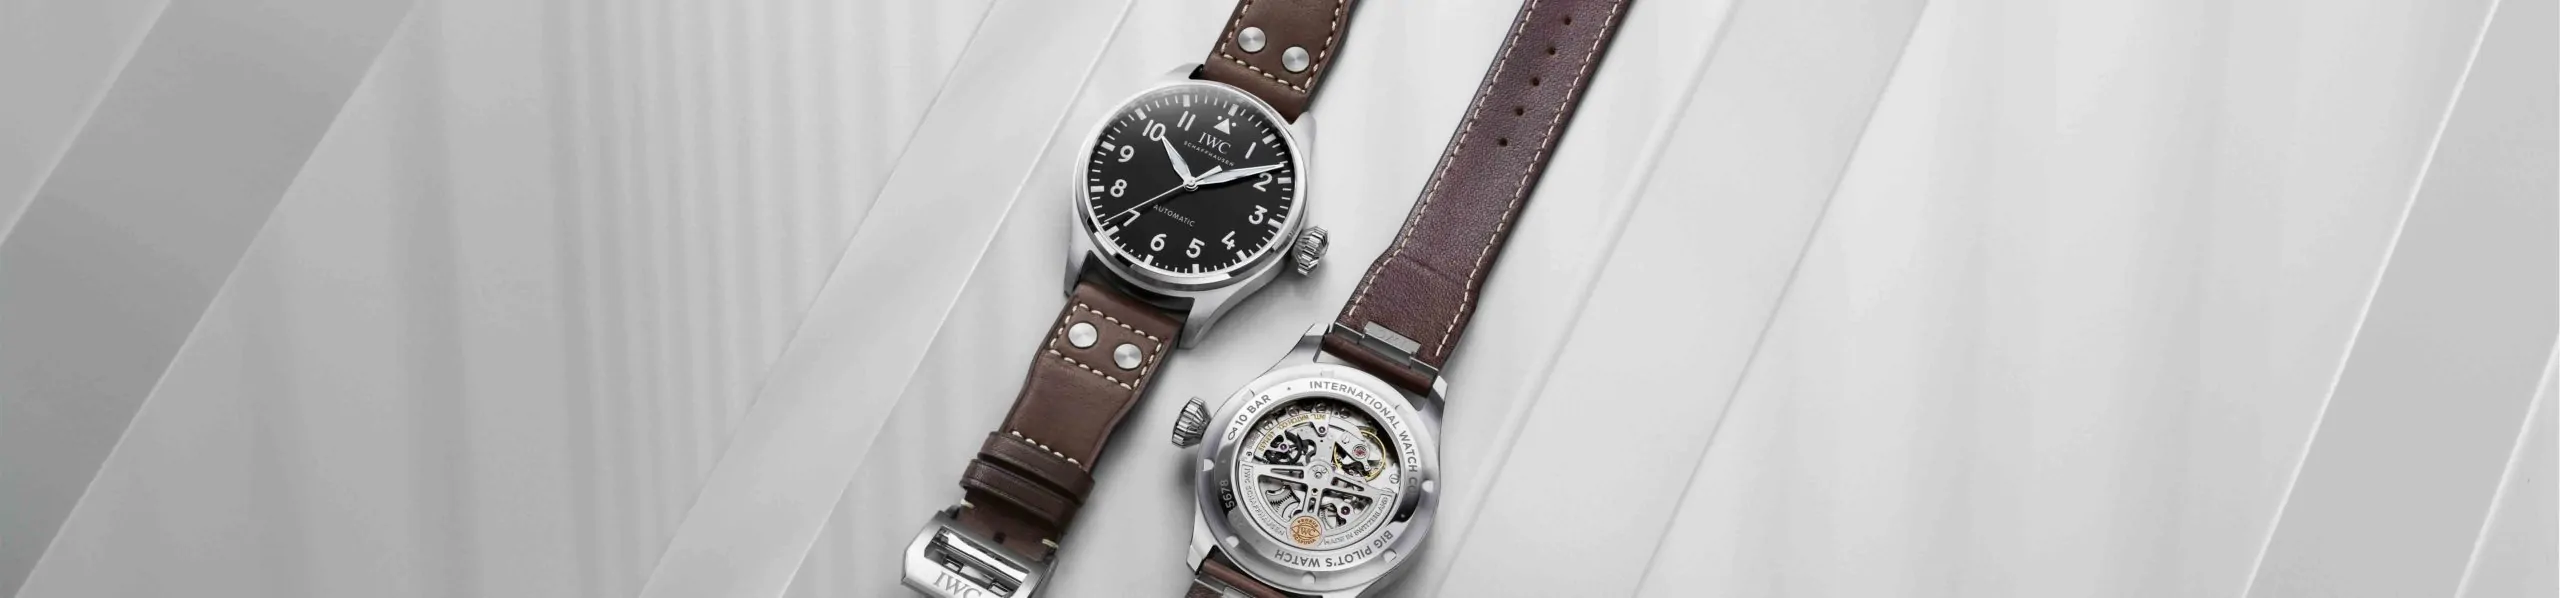 IWC Launch 2021 Pilot’s Watches Collection